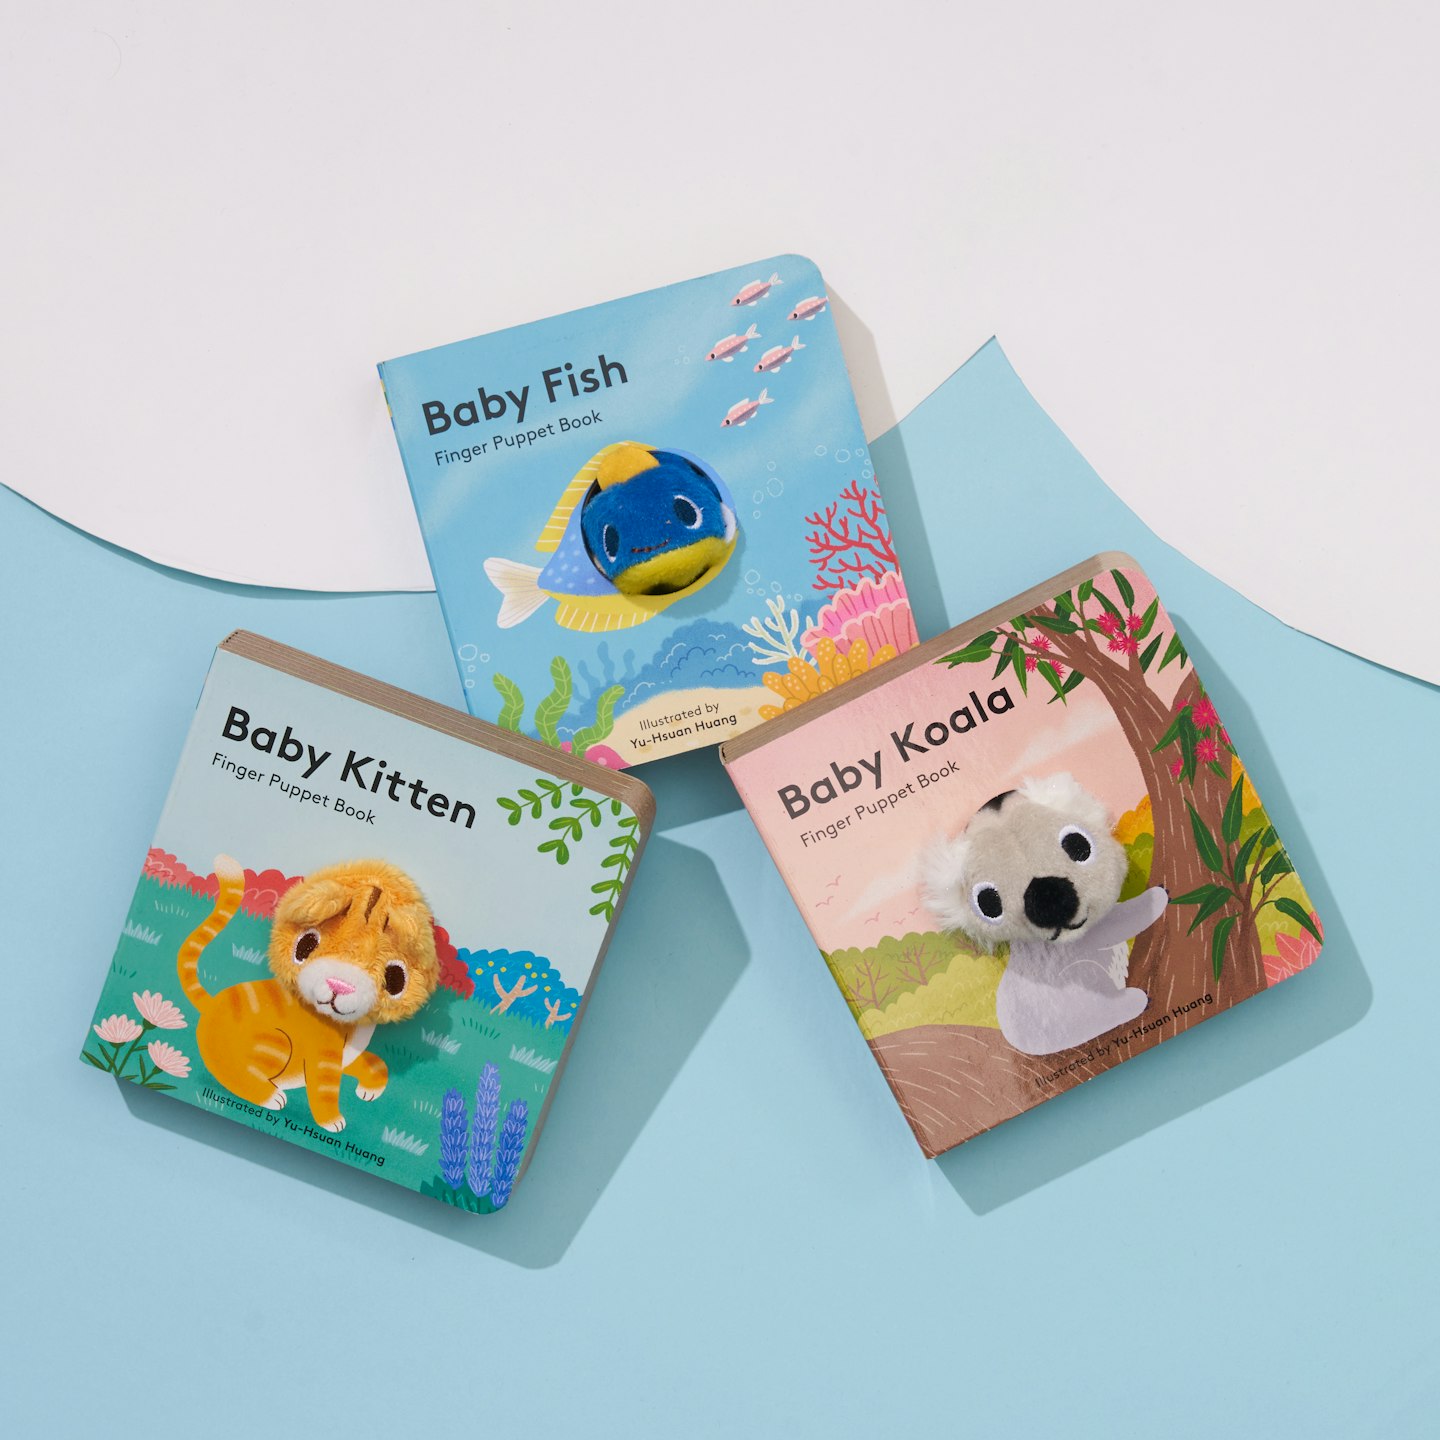 mum to be gifts Abrams & Chronicle, Baby Fish, Baby Koala and Baby Kitten Little Finger Puppet Books, from £5.39